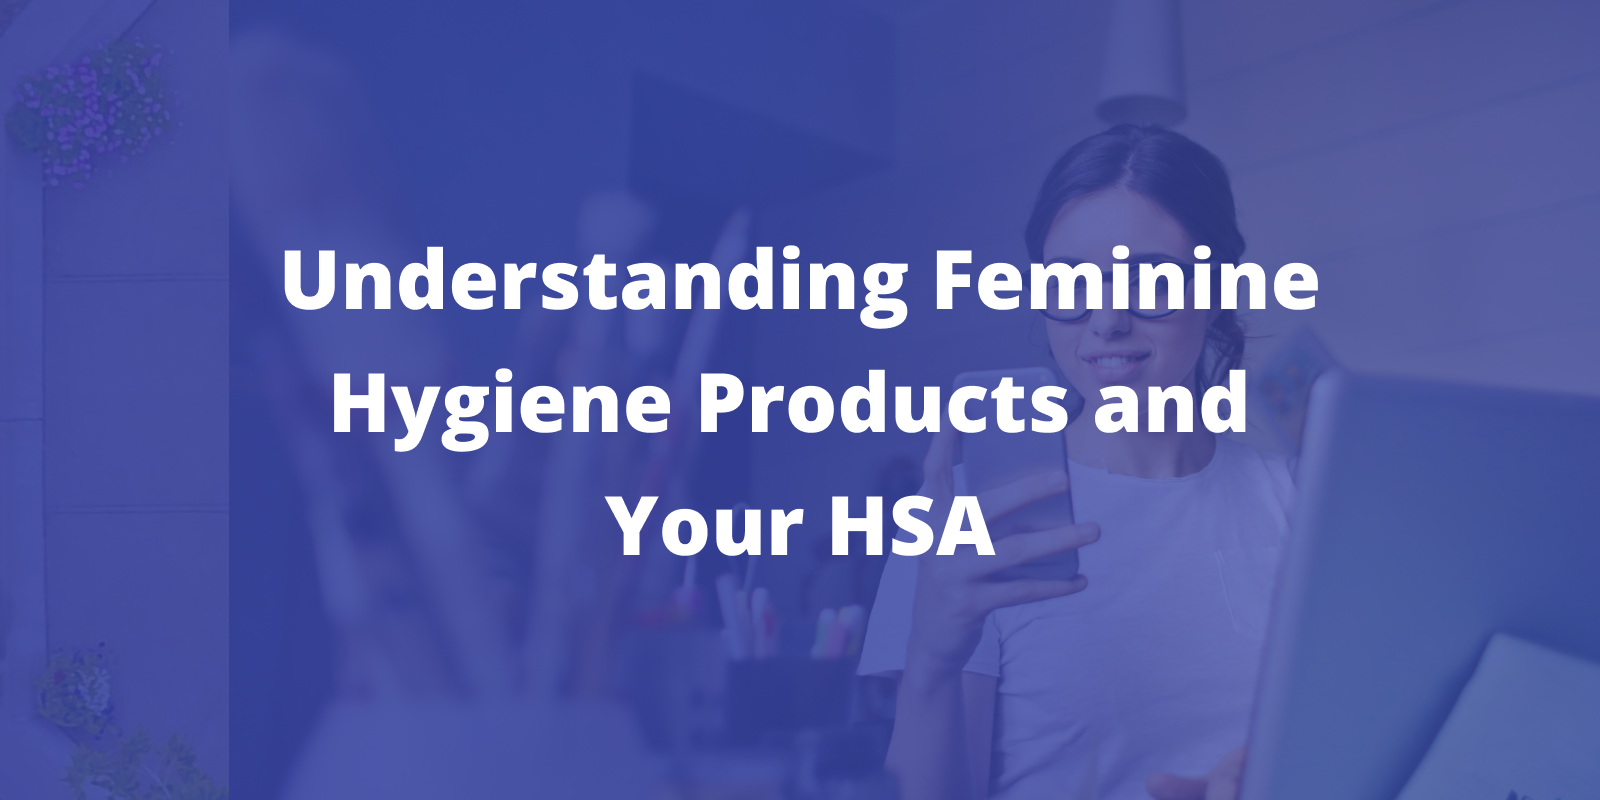 Understanding Feminine Hygiene Products and Your HSA